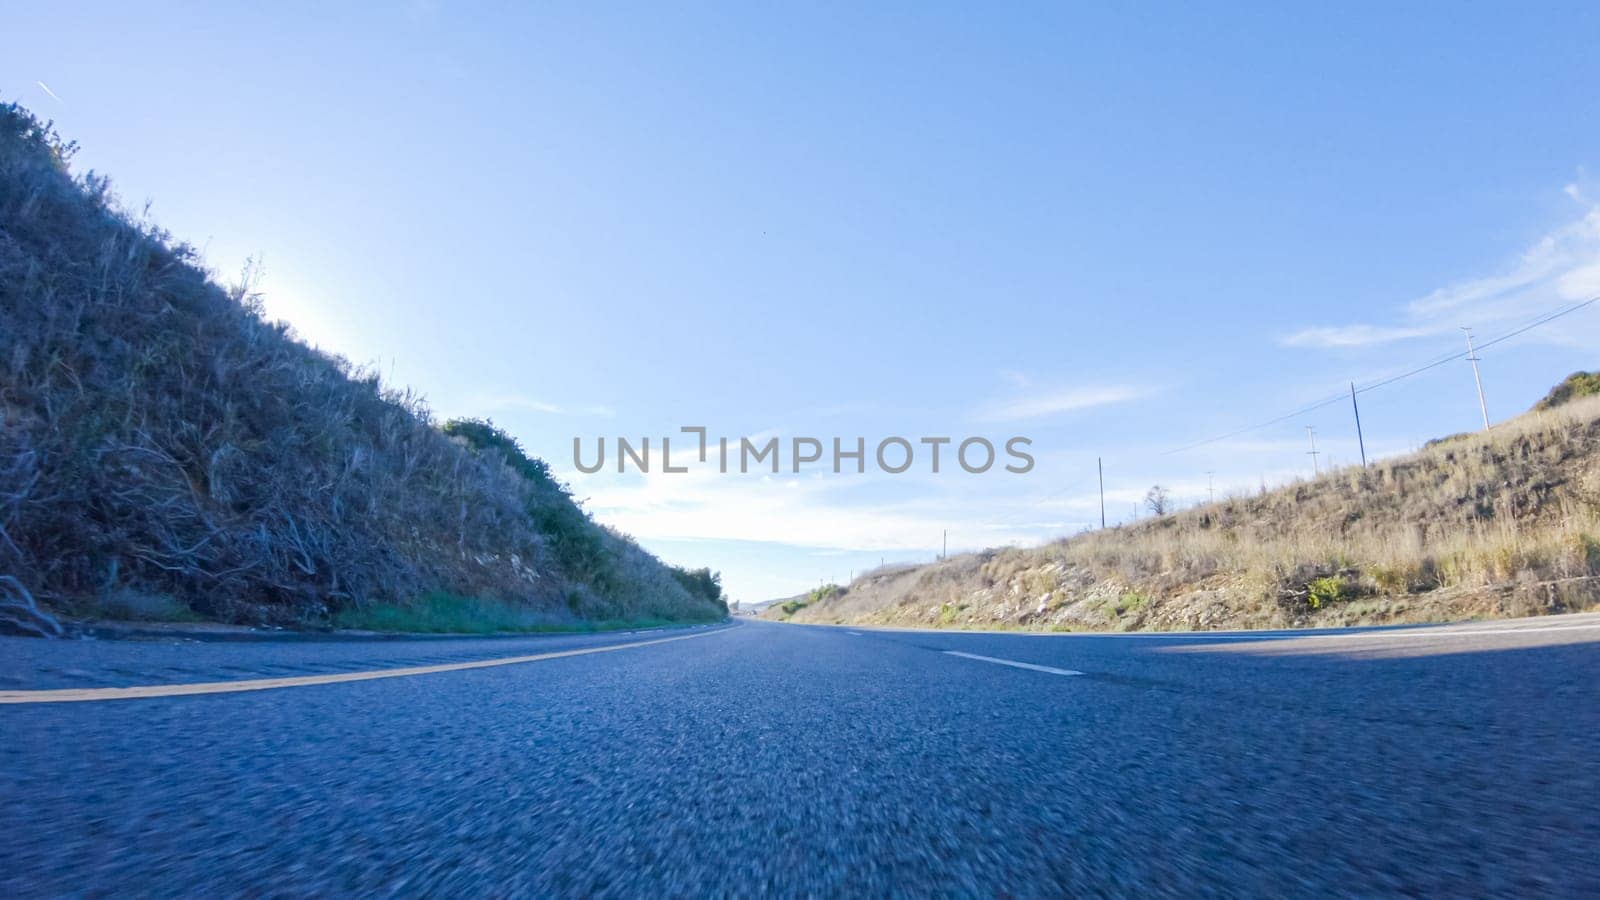 During the day, driving on HWY 101 near Arroyo Quemada Beach, California, offers scenic views of the surrounding coastal landscape.